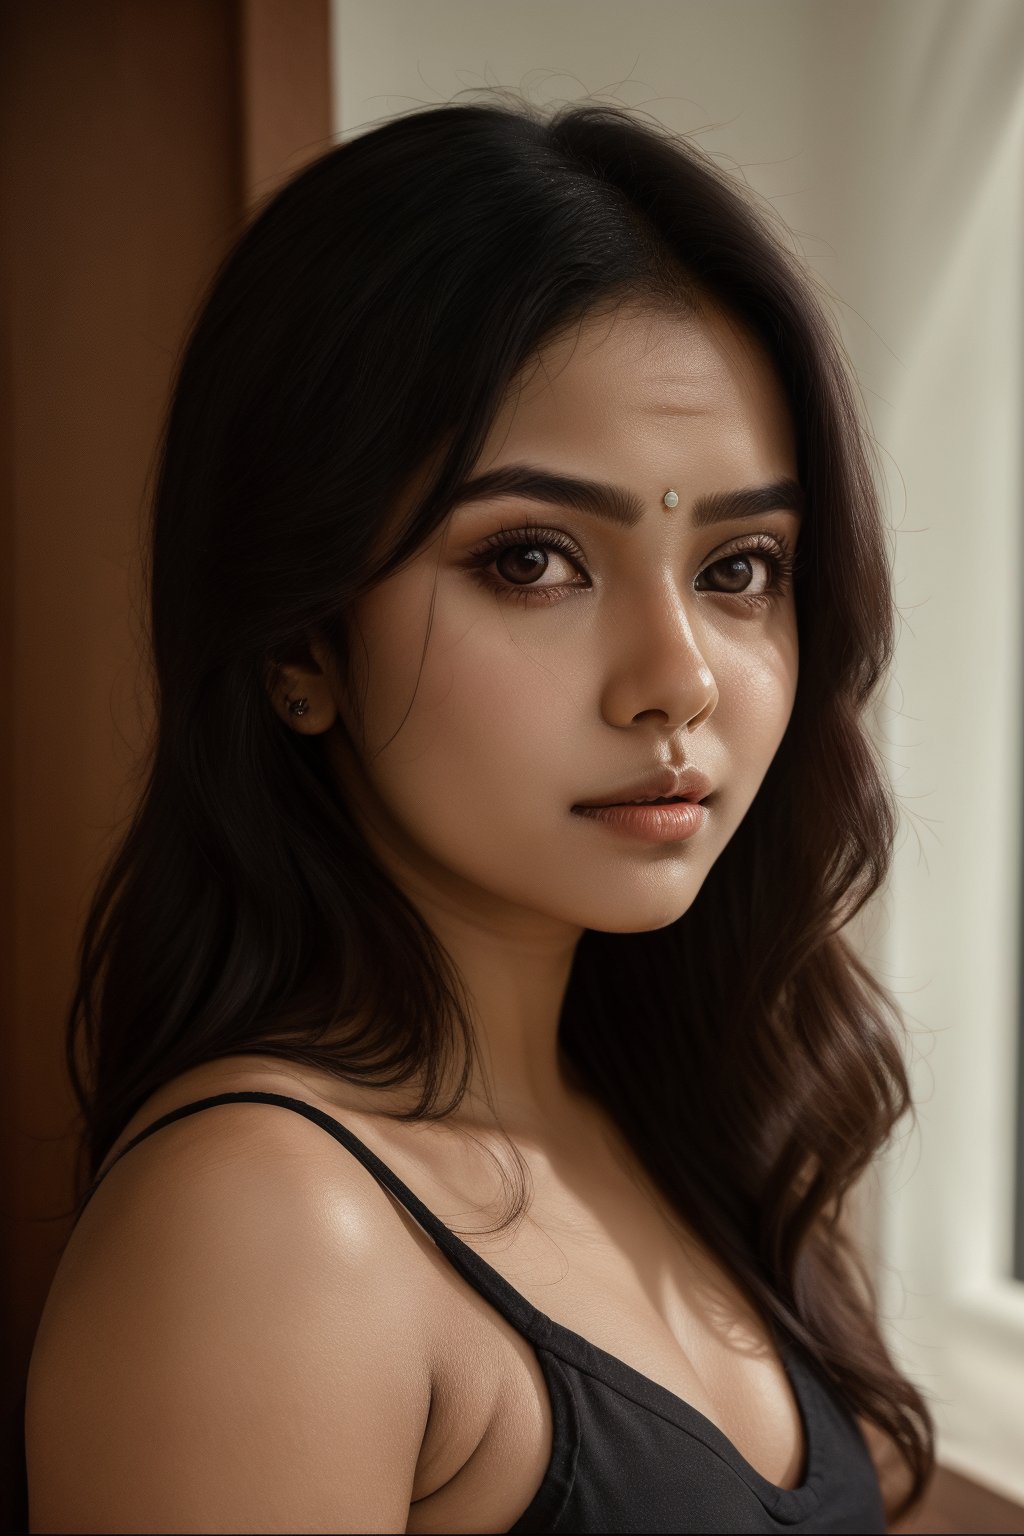 "Same face girl name Aria, round face, very dark Indian girl, Instagram influencer, black long hair, shiny juicy lips, brown eyes cute, 18 year old girl, photorealistic, portrait, extreme realism, doing yoga."